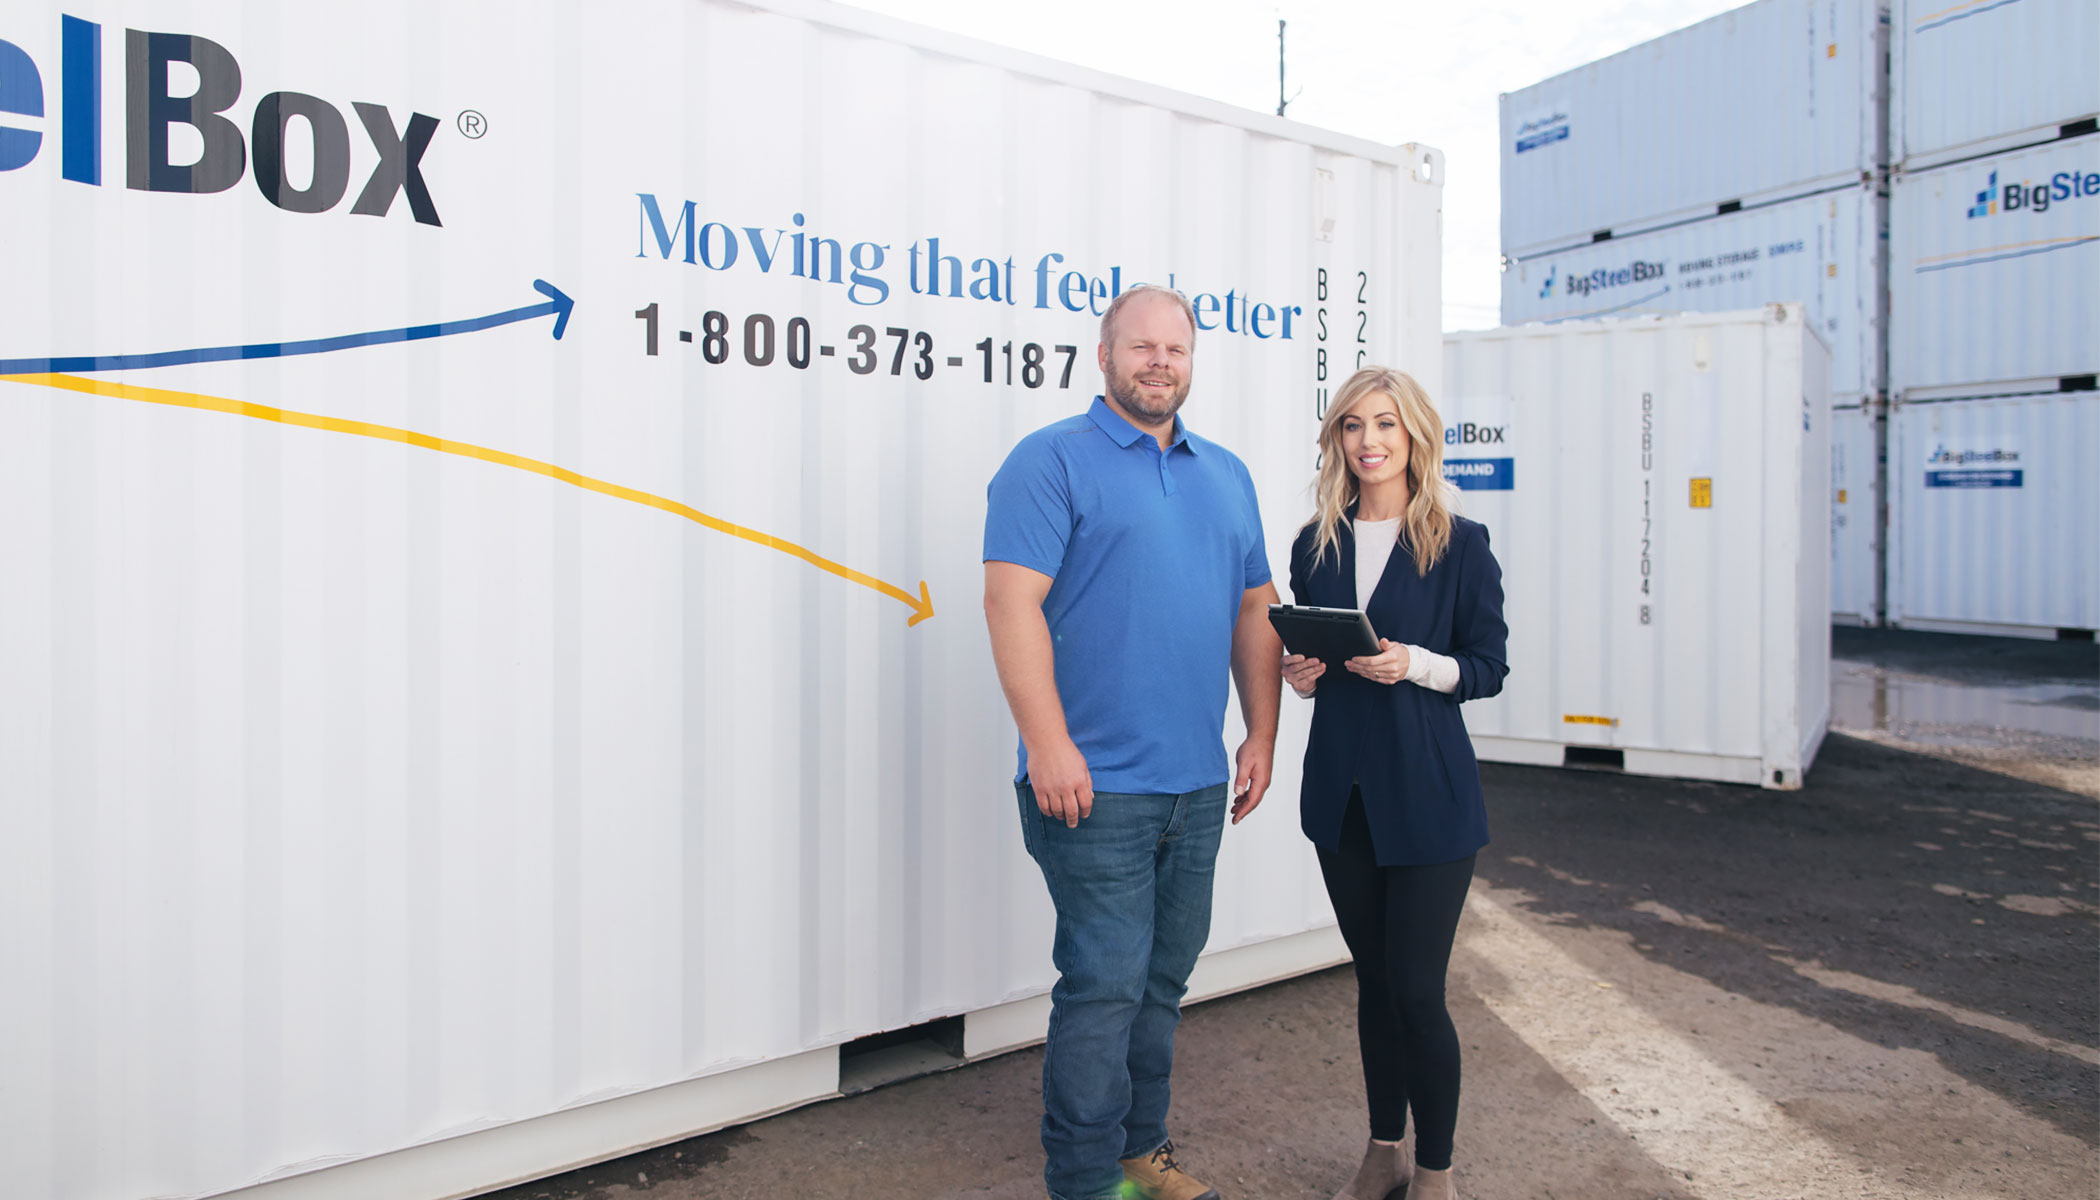 BigSteelBox Staff - how to compare moving quotes